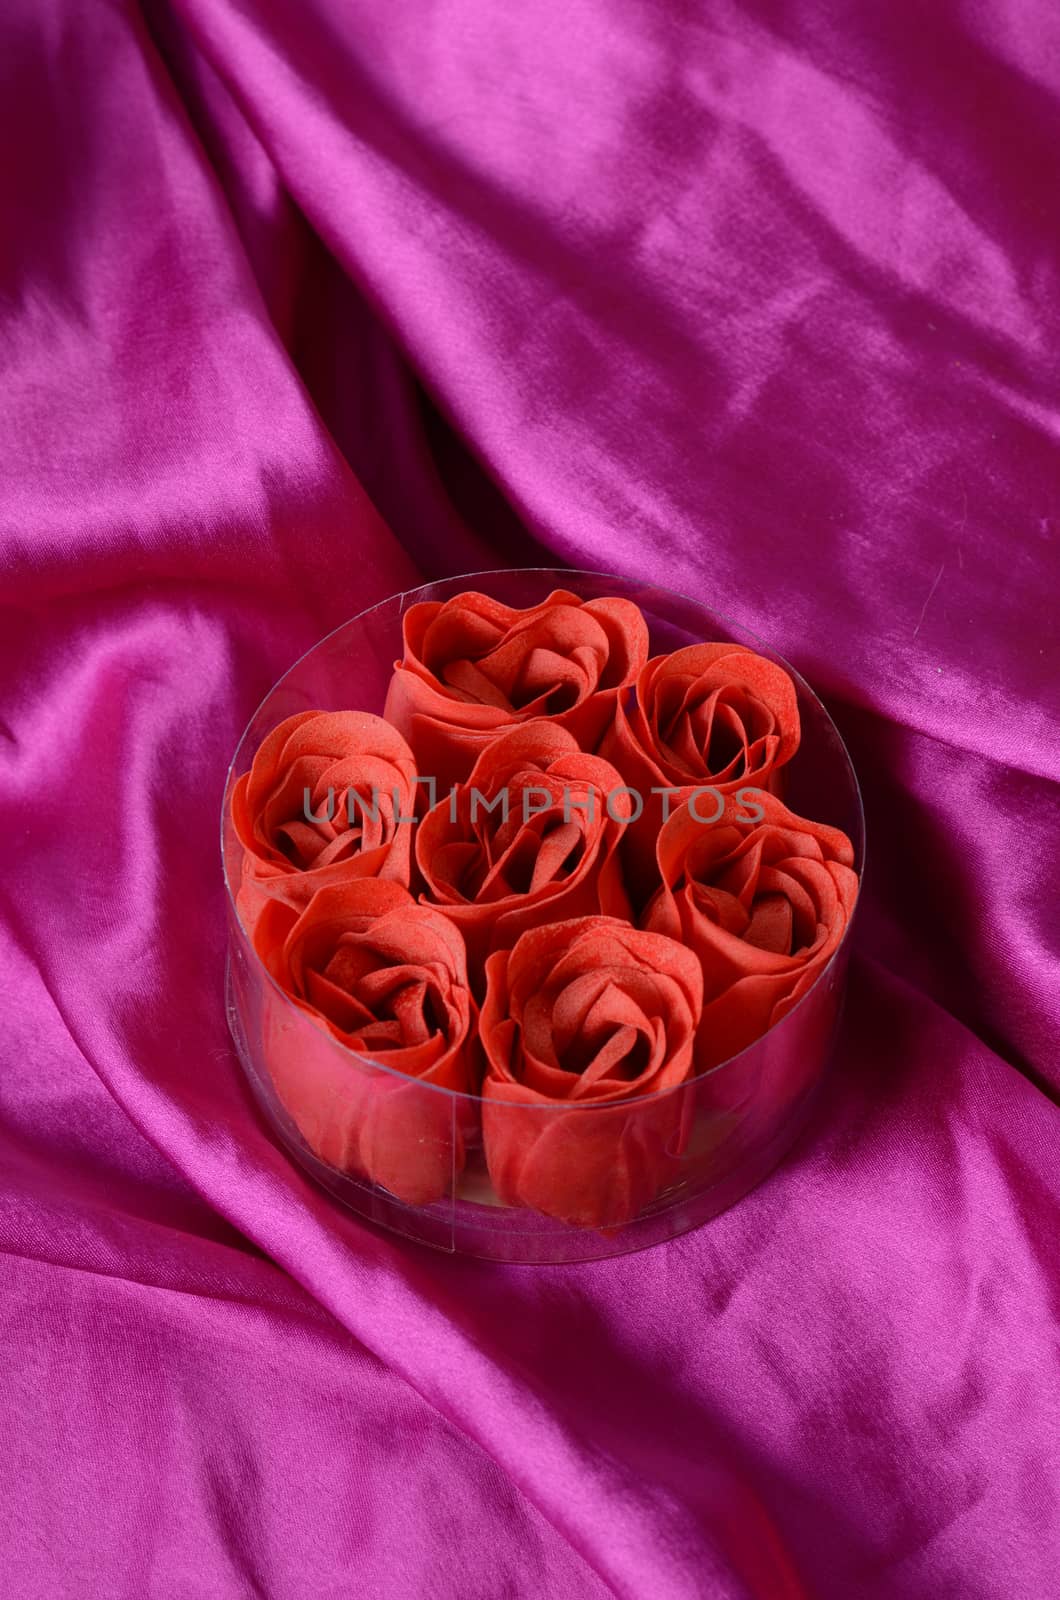 soap roses on the pink satin